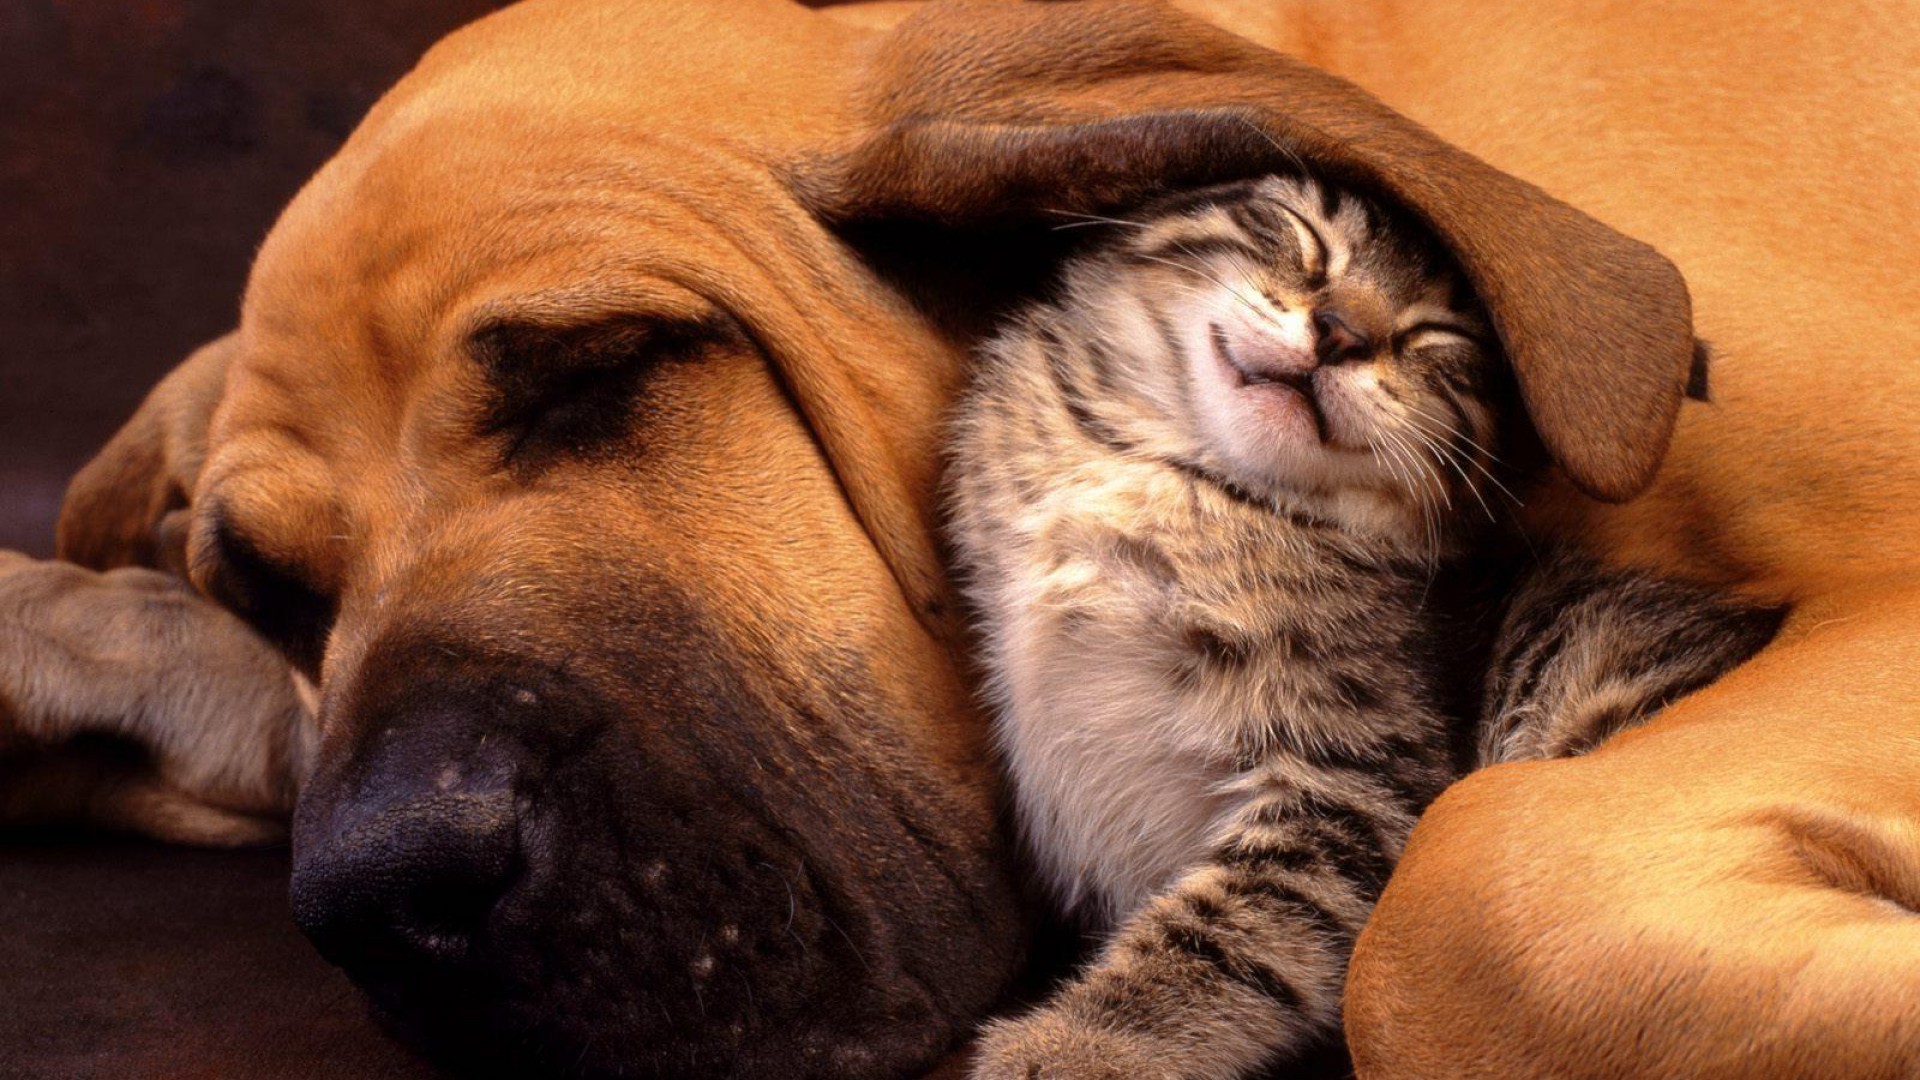 Friendship Nature Animals Dog Cats Closed Eyes Sleeping Animal Ears Baby Animals Hounds Kittens 1920x1080